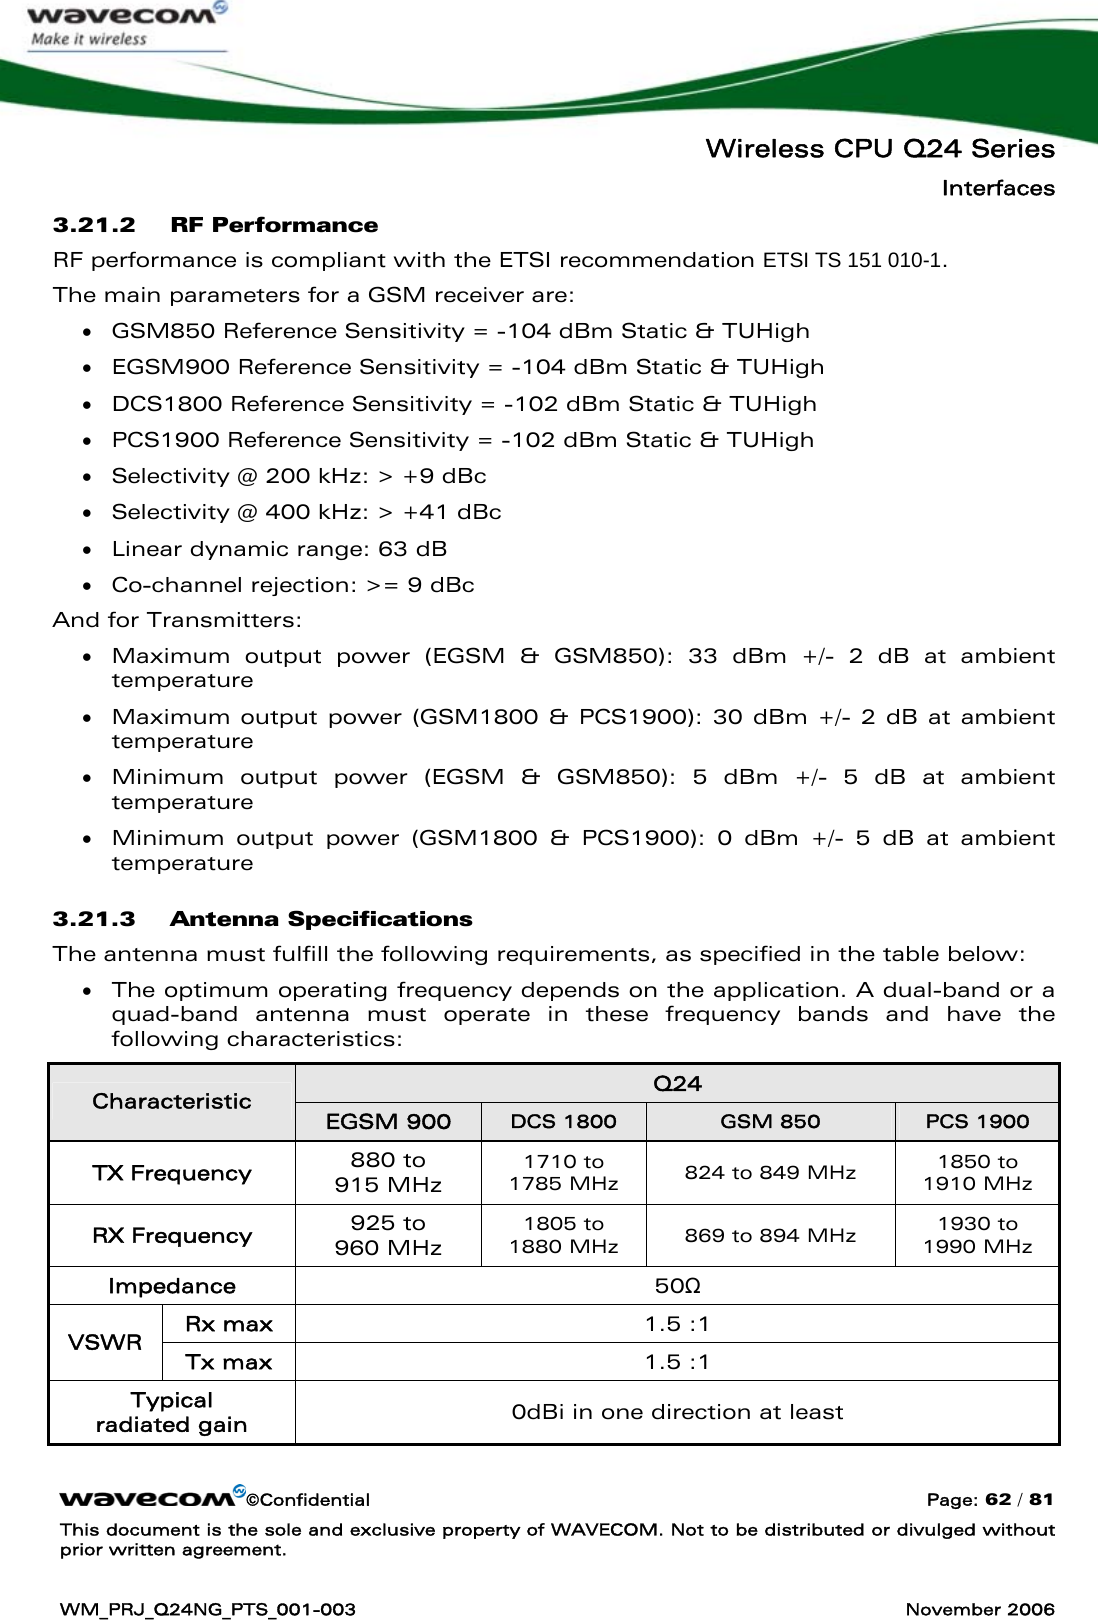   Wireless CPU Q24 Series Interfaces ©Confidential  Page: 62 / 81 This document is the sole and exclusive property of WAVECOM. Not to be distributed or divulged without prior written agreement.  WM_PRJ_Q24NG_PTS_001-003  November 2006  3.21.2 RF Performance RF performance is compliant with the ETSI recommendation ETSI TS 151 010-1. The main parameters for a GSM receiver are:  • GSM850 Reference Sensitivity = -104 dBm Static &amp; TUHigh • EGSM900 Reference Sensitivity = -104 dBm Static &amp; TUHigh • DCS1800 Reference Sensitivity = -102 dBm Static &amp; TUHigh • PCS1900 Reference Sensitivity = -102 dBm Static &amp; TUHigh • Selectivity @ 200 kHz: &gt; +9 dBc  • Selectivity @ 400 kHz: &gt; +41 dBc • Linear dynamic range: 63 dB • Co-channel rejection: &gt;= 9 dBc And for Transmitters: • Maximum output power (EGSM &amp; GSM850): 33 dBm +/- 2 dB at ambient temperature • Maximum output power (GSM1800 &amp; PCS1900): 30 dBm +/- 2 dB at ambient temperature • Minimum output power (EGSM &amp; GSM850): 5 dBm +/- 5 dB at ambient temperature • Minimum output power (GSM1800 &amp; PCS1900): 0 dBm +/- 5 dB at ambient temperature 3.21.3 Antenna Specifications The antenna must fulfill the following requirements, as specified in the table below: • The optimum operating frequency depends on the application. A dual-band or a quad-band antenna must operate in these frequency bands and have the following characteristics: Q24 Characteristic EGSM 900  DCS 1800  GSM 850  PCS 1900 TX Frequency  880 to  915 MHz 1710 to  1785 MHz  824 to 849 MHz  1850 to  1910 MHz RX Frequency  925 to  960 MHz 1805 to  1880 MHz  869 to 894 MHz  1930 to  1990 MHz Impedance  50Ω  Rx max  1.5 :1 VSWR  Tx max  1.5 :1 Typical  radiated gain  0dBi in one direction at least  